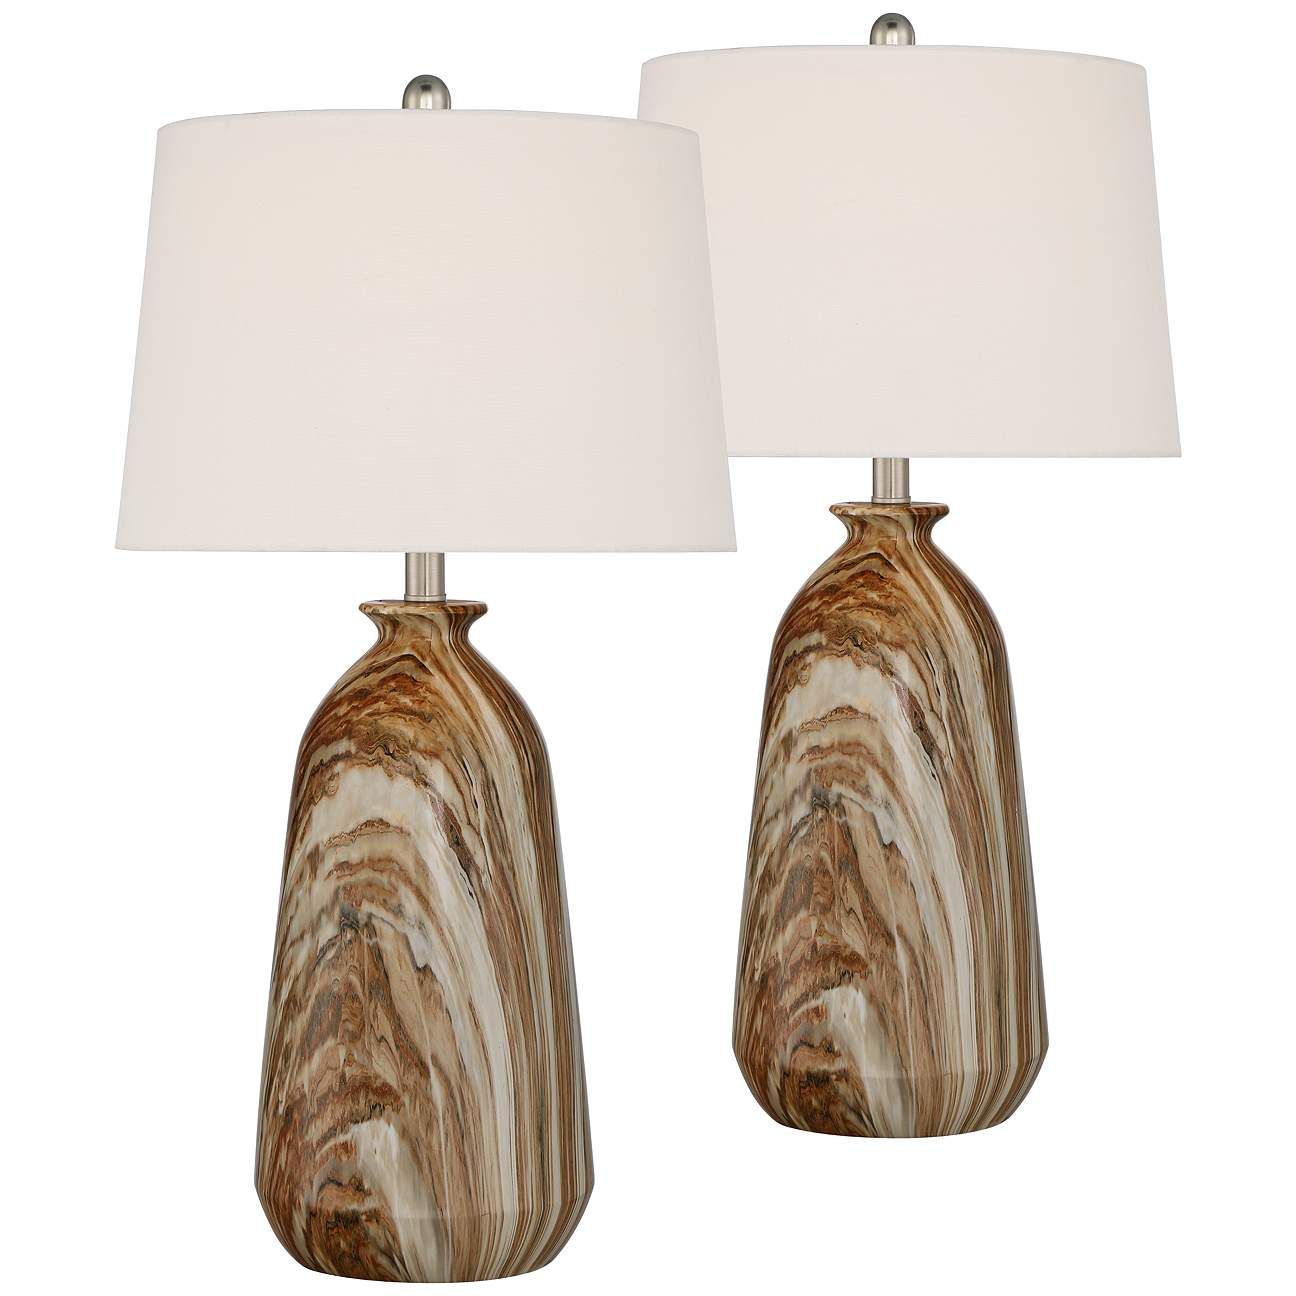 Carlton Brown Faux Marble Table Lamps with White Tapered Shades Set of 2 | Lamps Plus